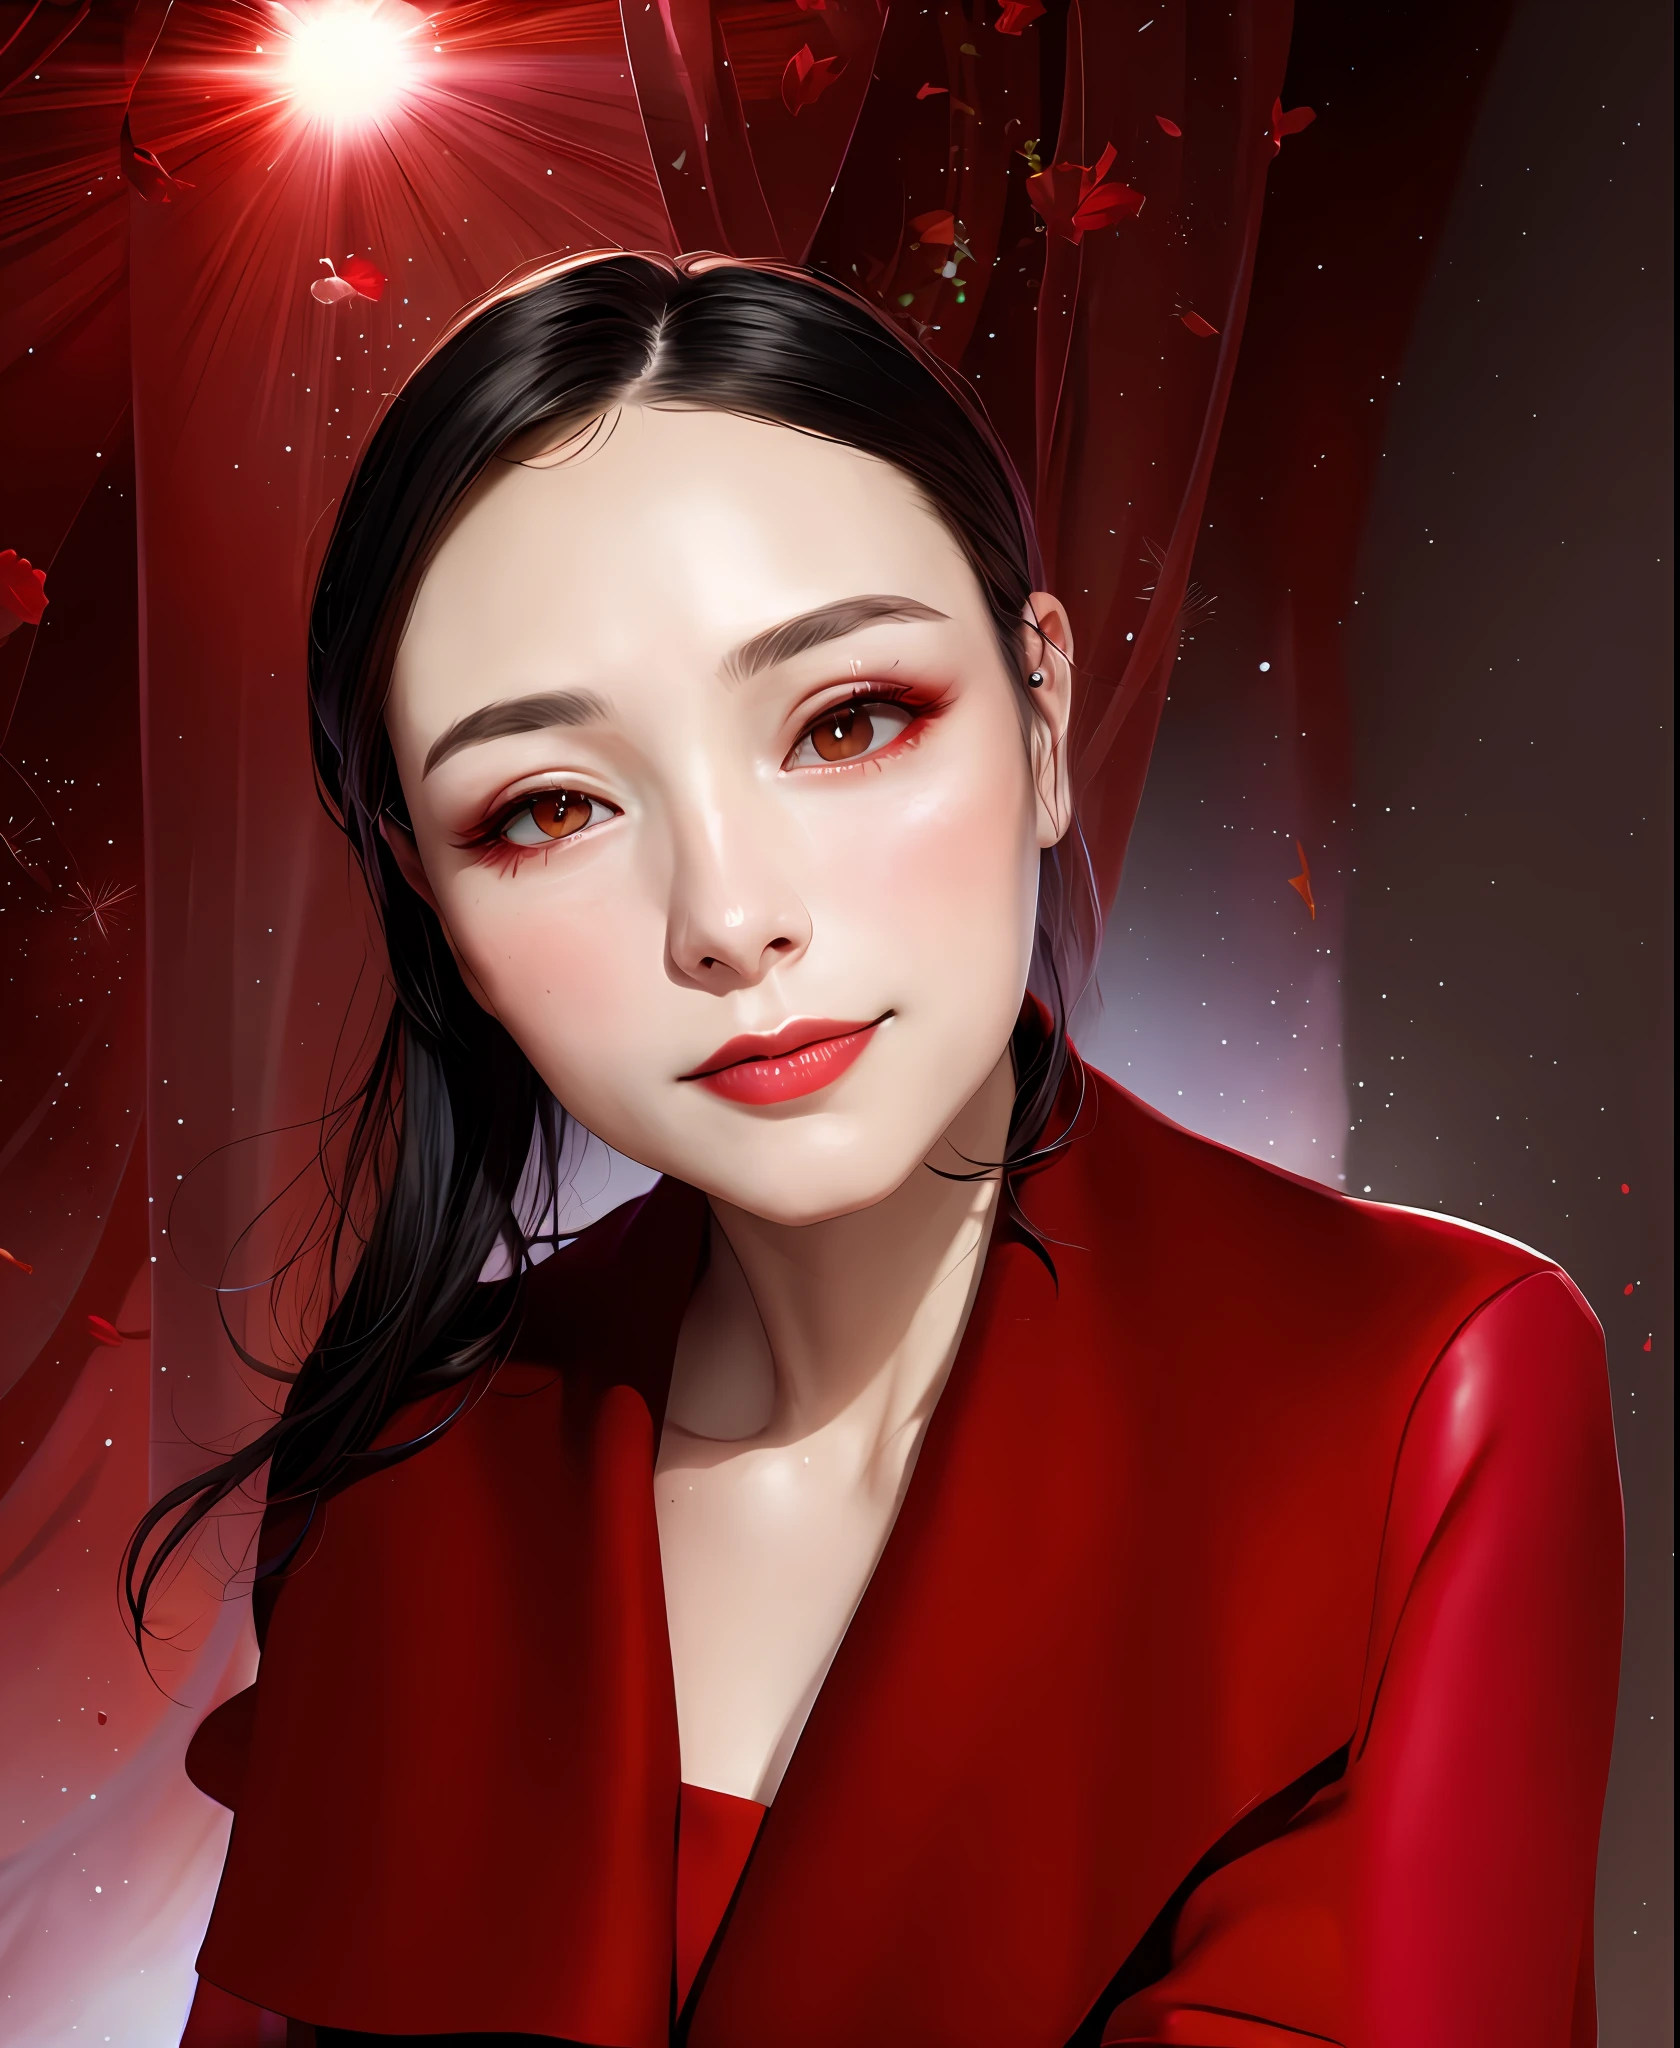 there is a woman with a red coat and red lipstick, inspired by Ai Xuan, stunning digital illustration, glossy digital painting, inspired by Yanjun Cheng, beautiful digital illustration, inspired by Zhang Yan, inspired by Yao Tingmei, inspired by Li Fangying, inspired by Chen Lu, inspired by Sim Sa-jeong, exquisite digital illustration, inspired by Lü Ji